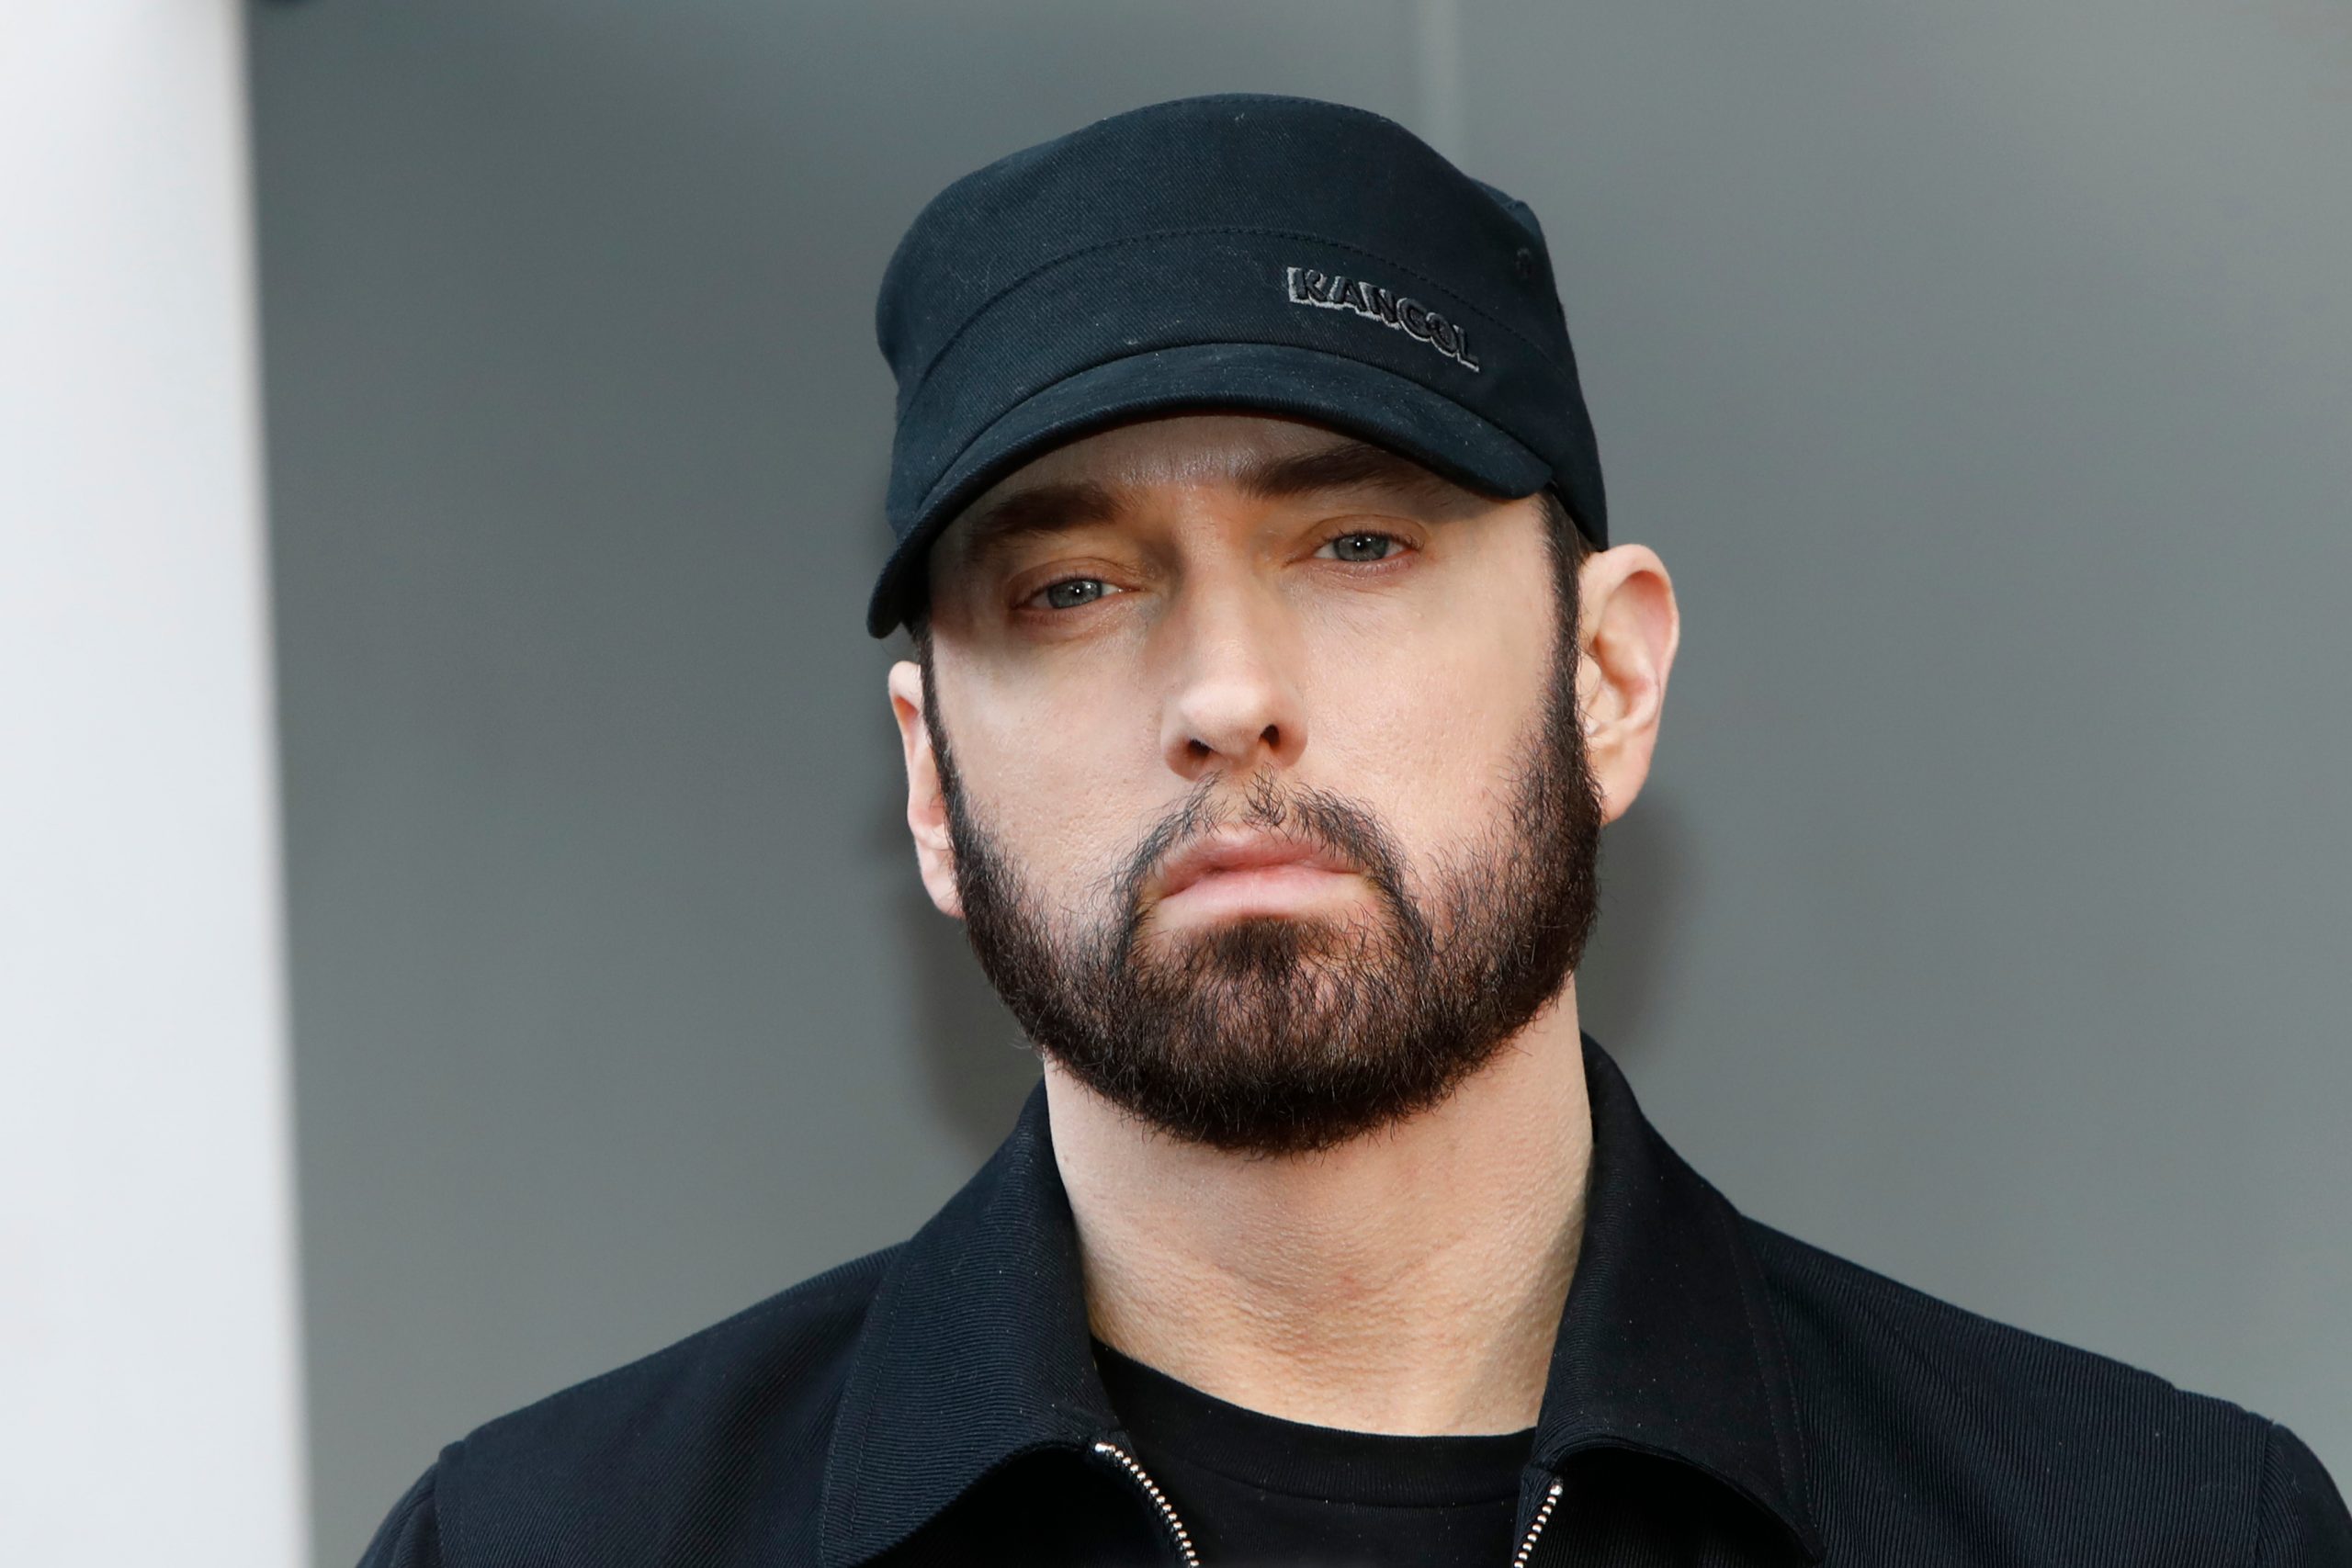 Eminem’s ‘Music To Be Murdered By’ Jumps To #3 On Billboard 200, Breaking 50-Year-Old Record For Biggest Chart Leap